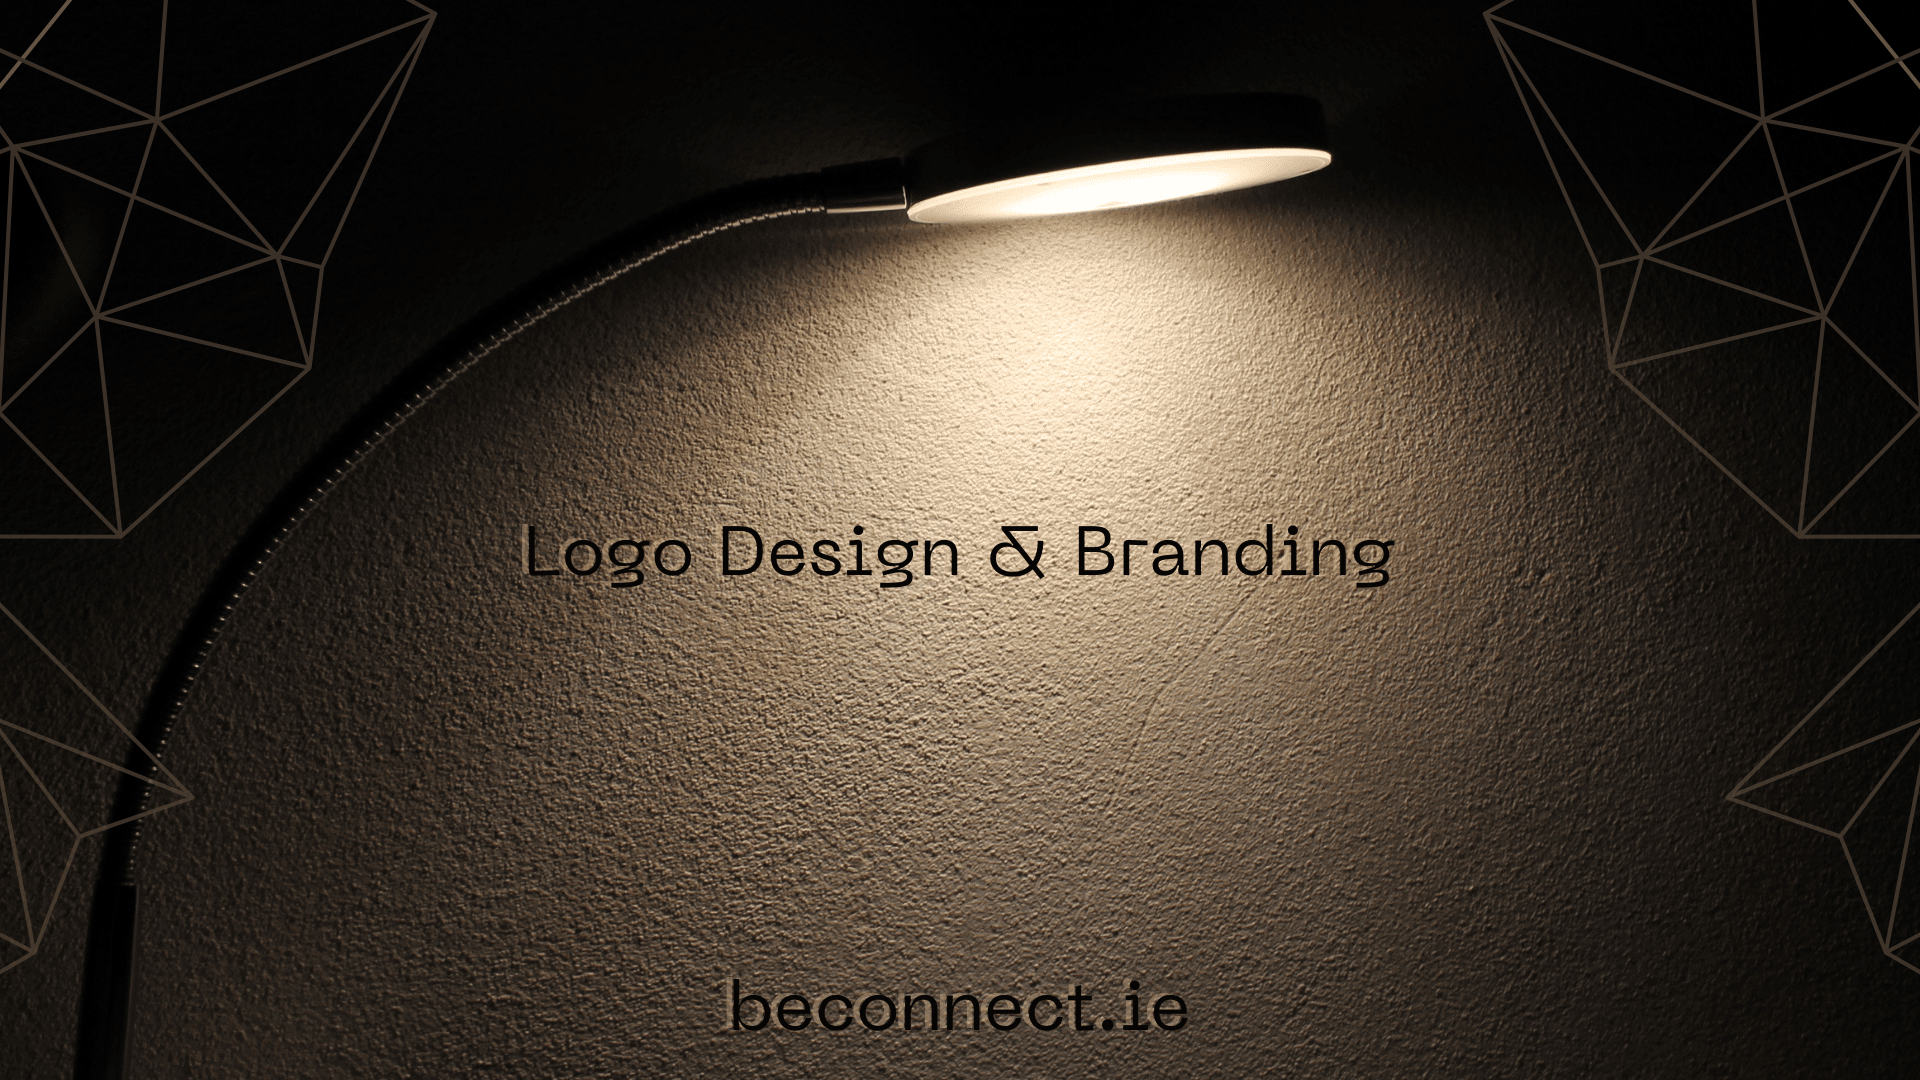 Graphic illustrating the concept of logo design and branding